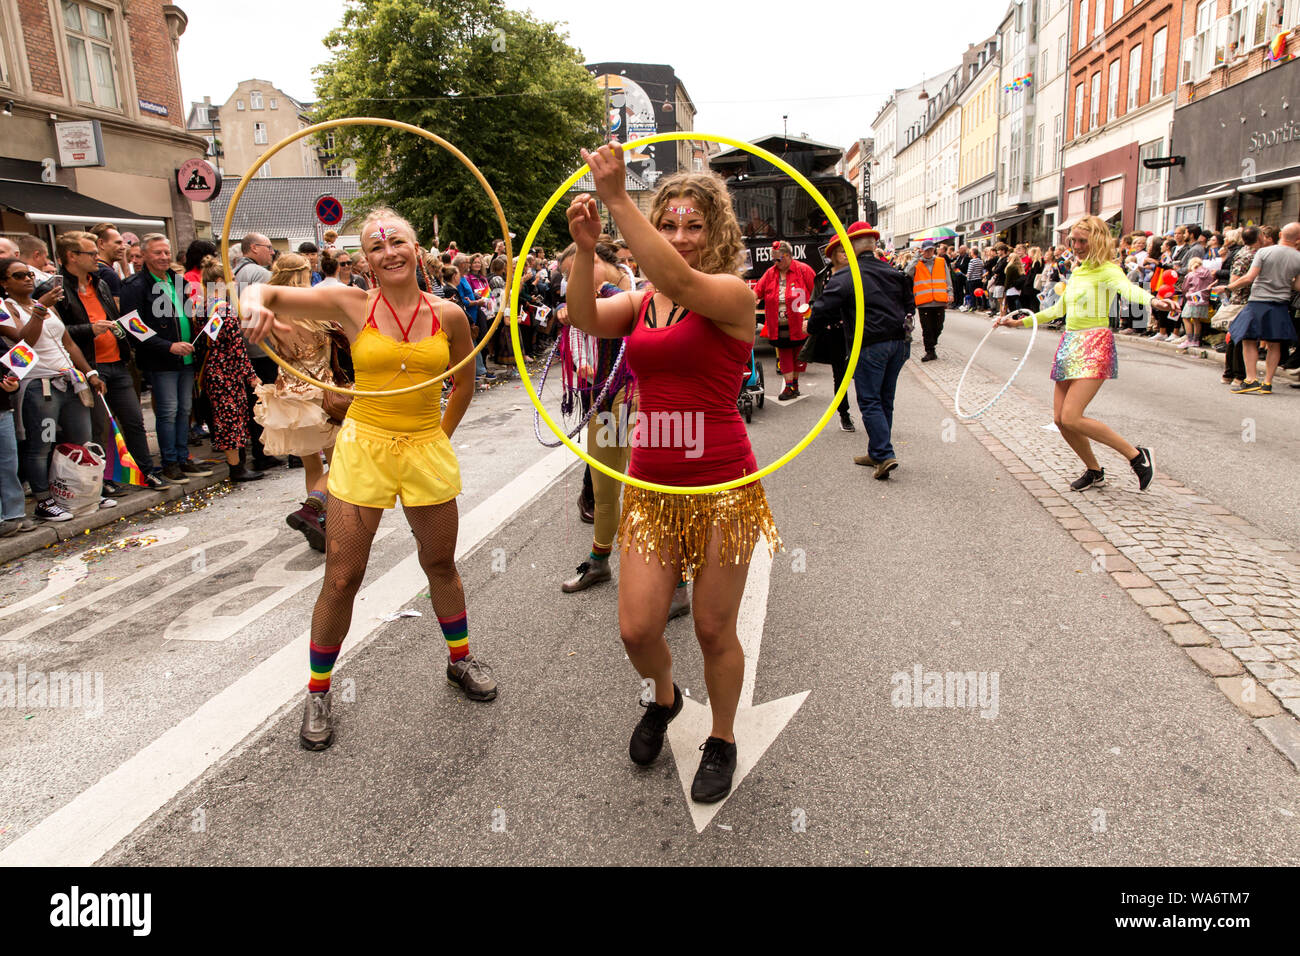 Participants seen at the Copenhagen Pride Parade 2019 on August 17, 2019 in Copenhagen, Denmark. The Danish Parade This year the Parade consisted of some 160 groups, counting 35 -